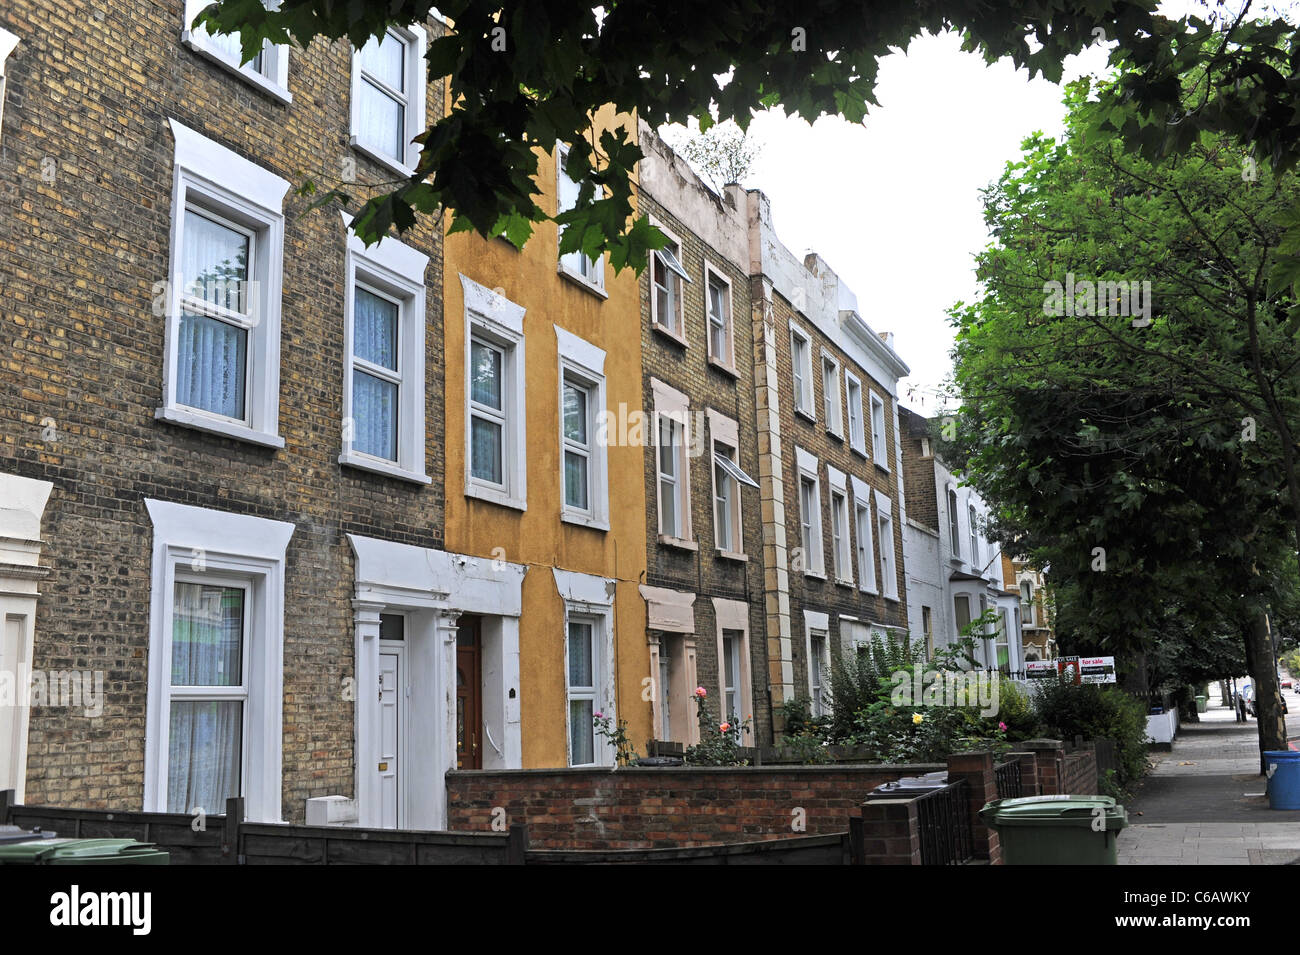 Typical terraced houses and properties in the London Borough of Lewisham SE23 Stock Photo